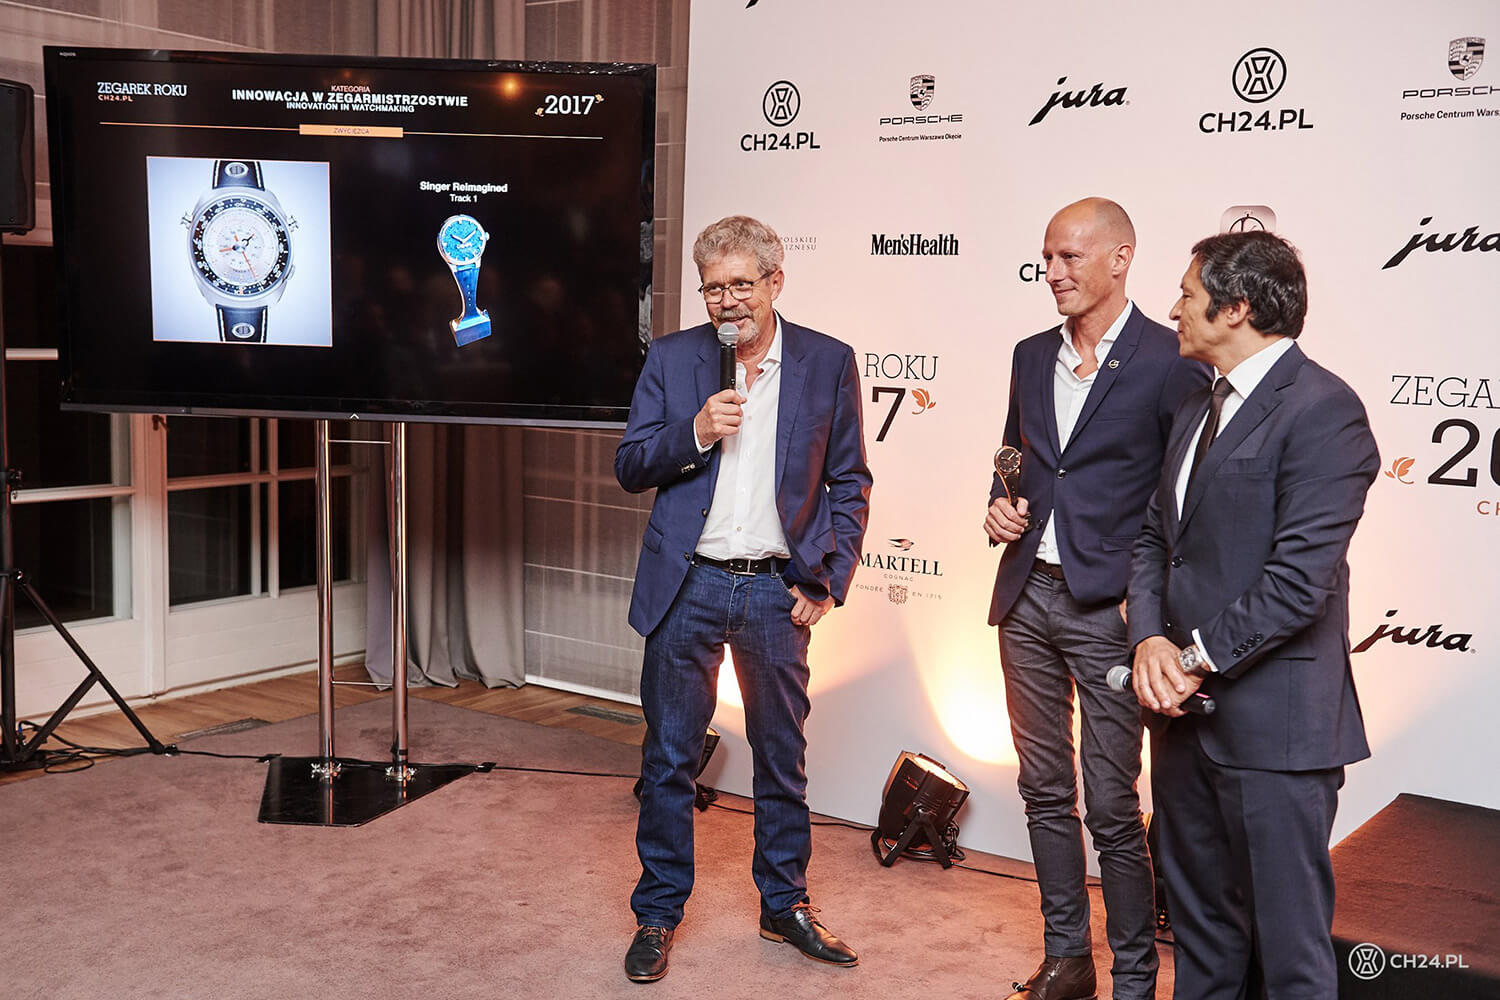 Jean-Marc Wiederrecht (Agenhor) at the microphone beside Marco Borraccino Miguel Seabra accepting the CH24.PL WOTY 2017 award for the Singer Reimagined Track 1